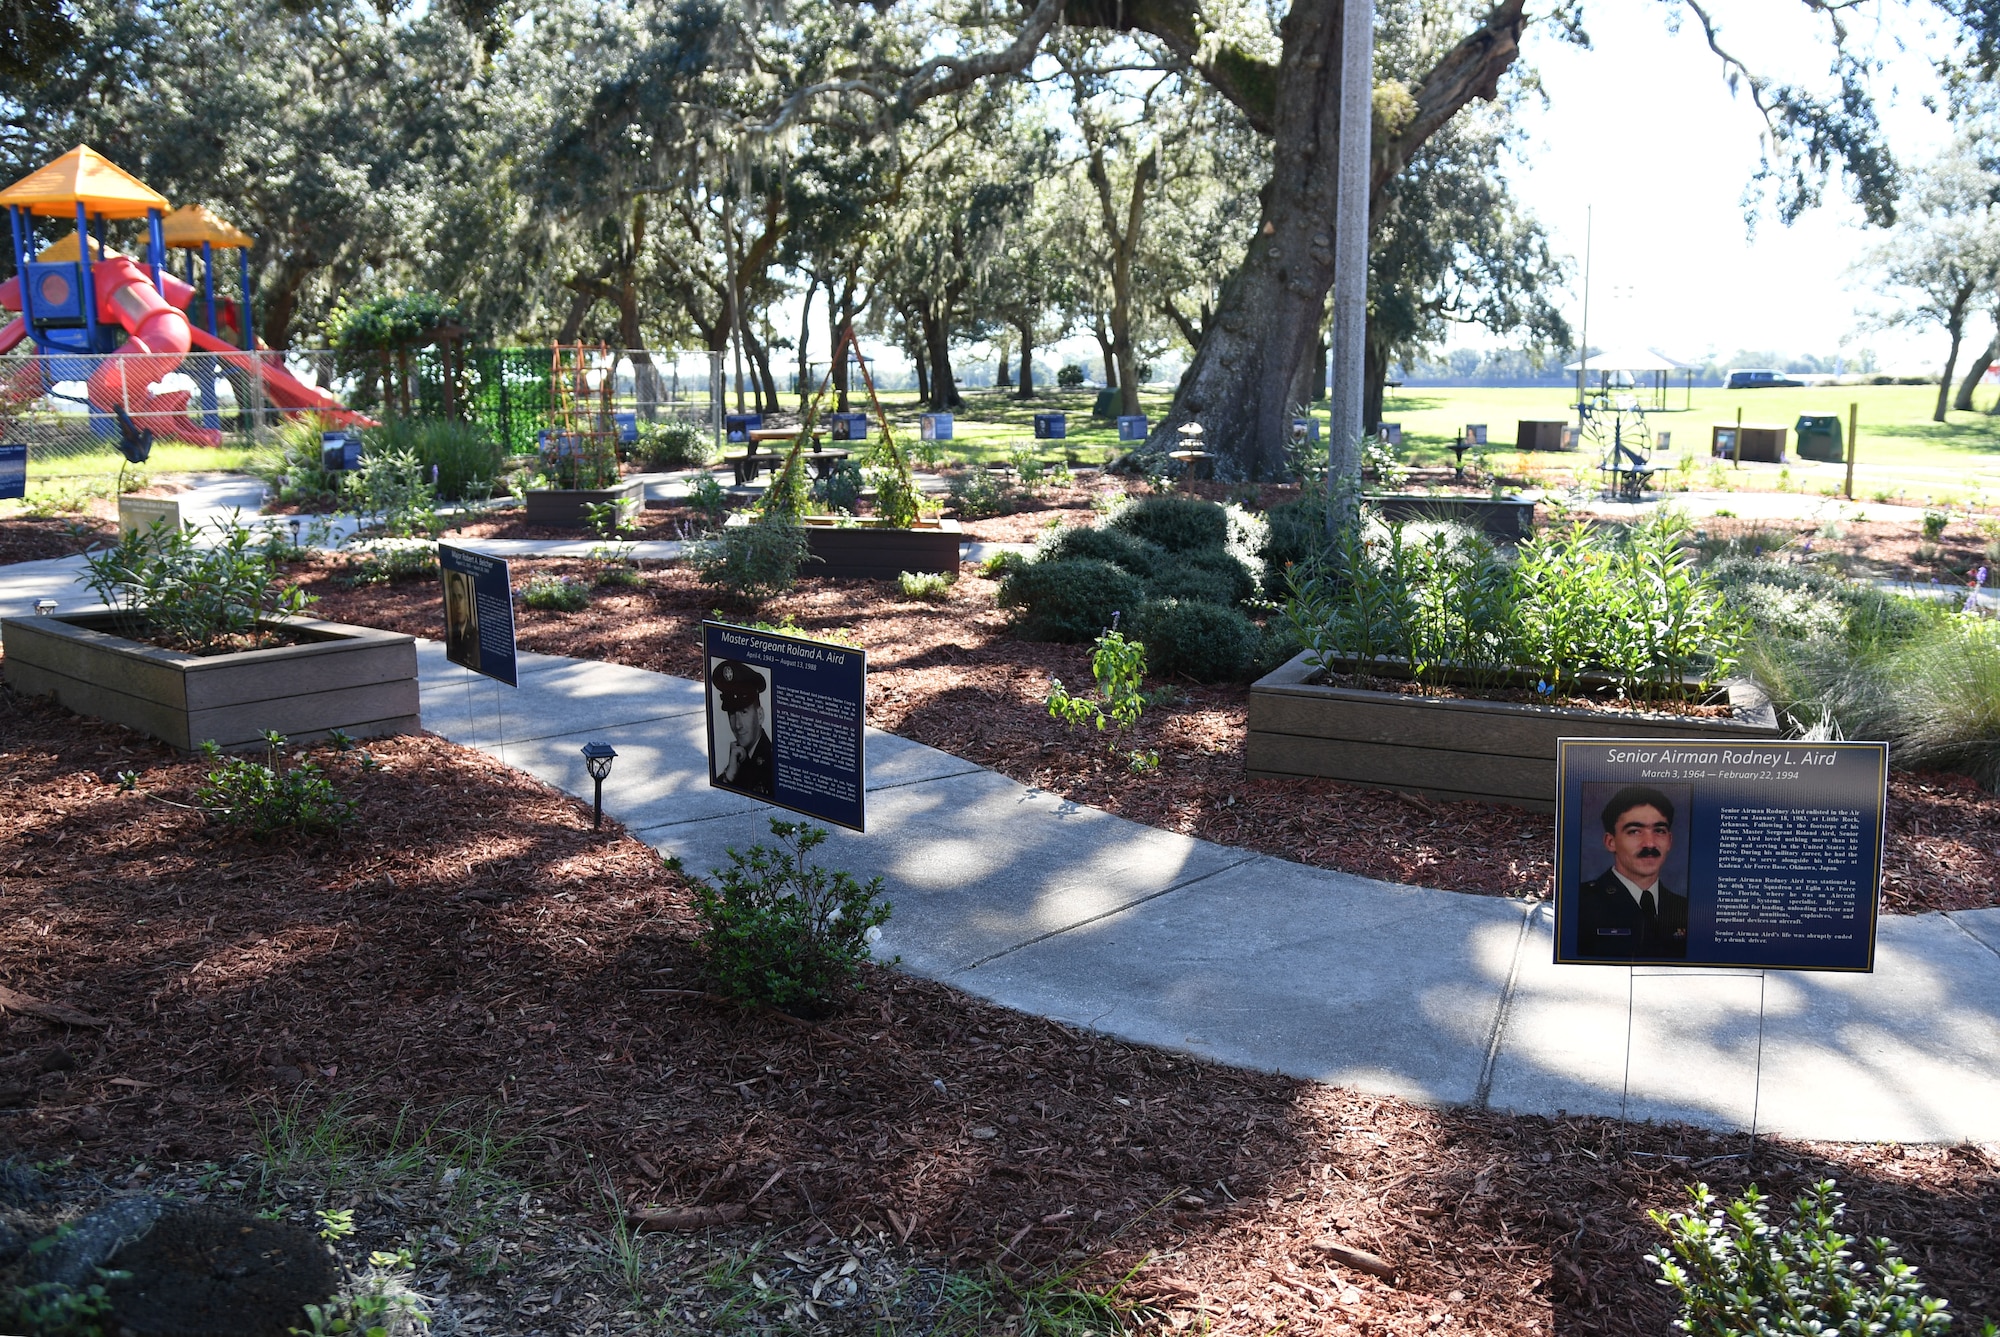 The Air Force Families Forever Fallen Heroes Butterfly Garden is open for viewing during the dedication ceremony at the marina park at Keesler Air Force Base, Mississippi, Sept. 24, 2021. The garden was created as a designated location where the families of our fallen heroes can find a serene area to pay tribute to their loved one as well as honoring our fallen service members. (U.S. Air Force photo by Kemberly Groue)